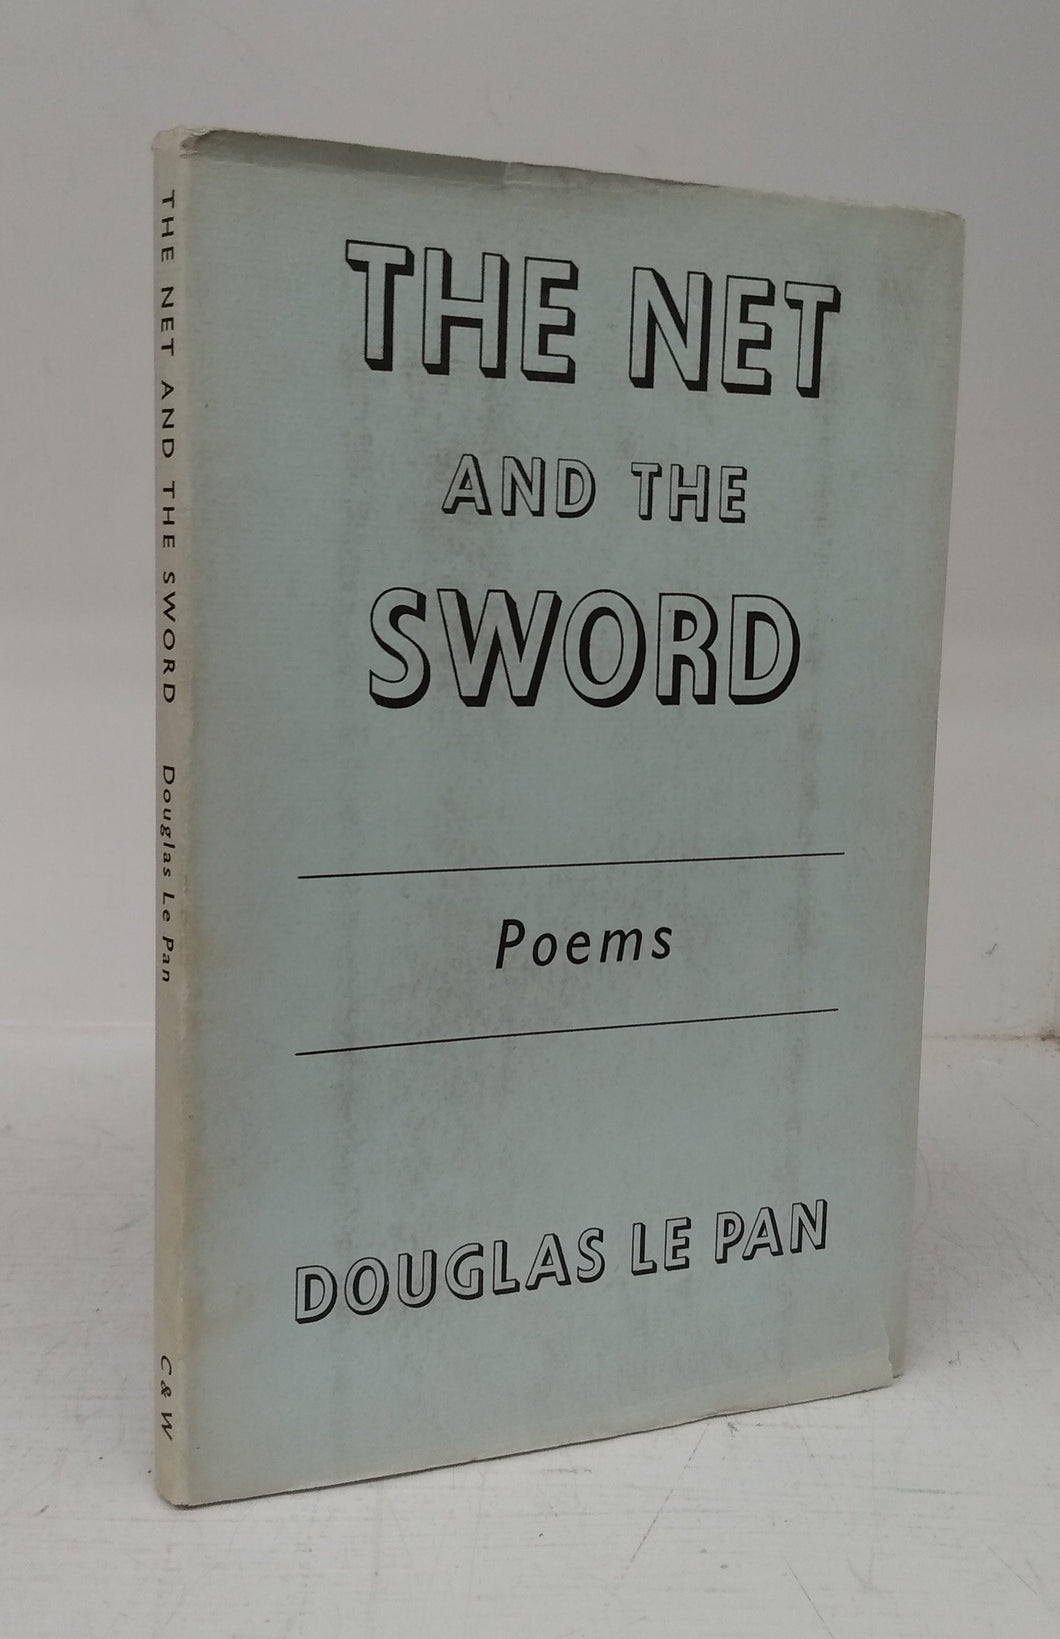 The Net and the Sword: Poems